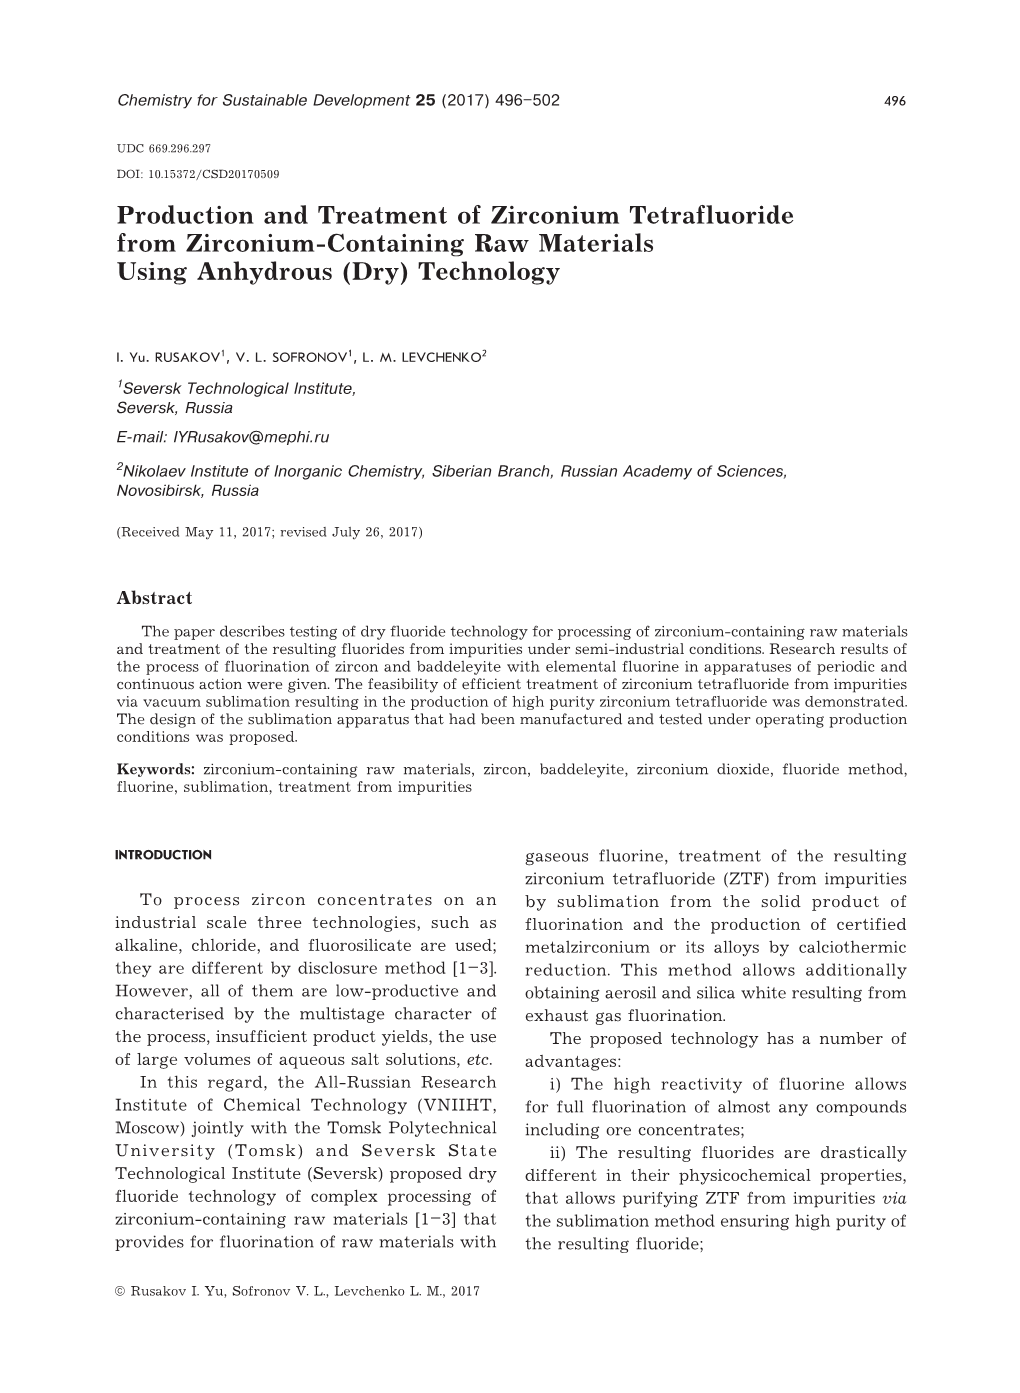 Production and Treatment of Zirconium Tetrafluoride from Zirconium-Containing Raw Materials Using Anhydrous (Dry) Technology